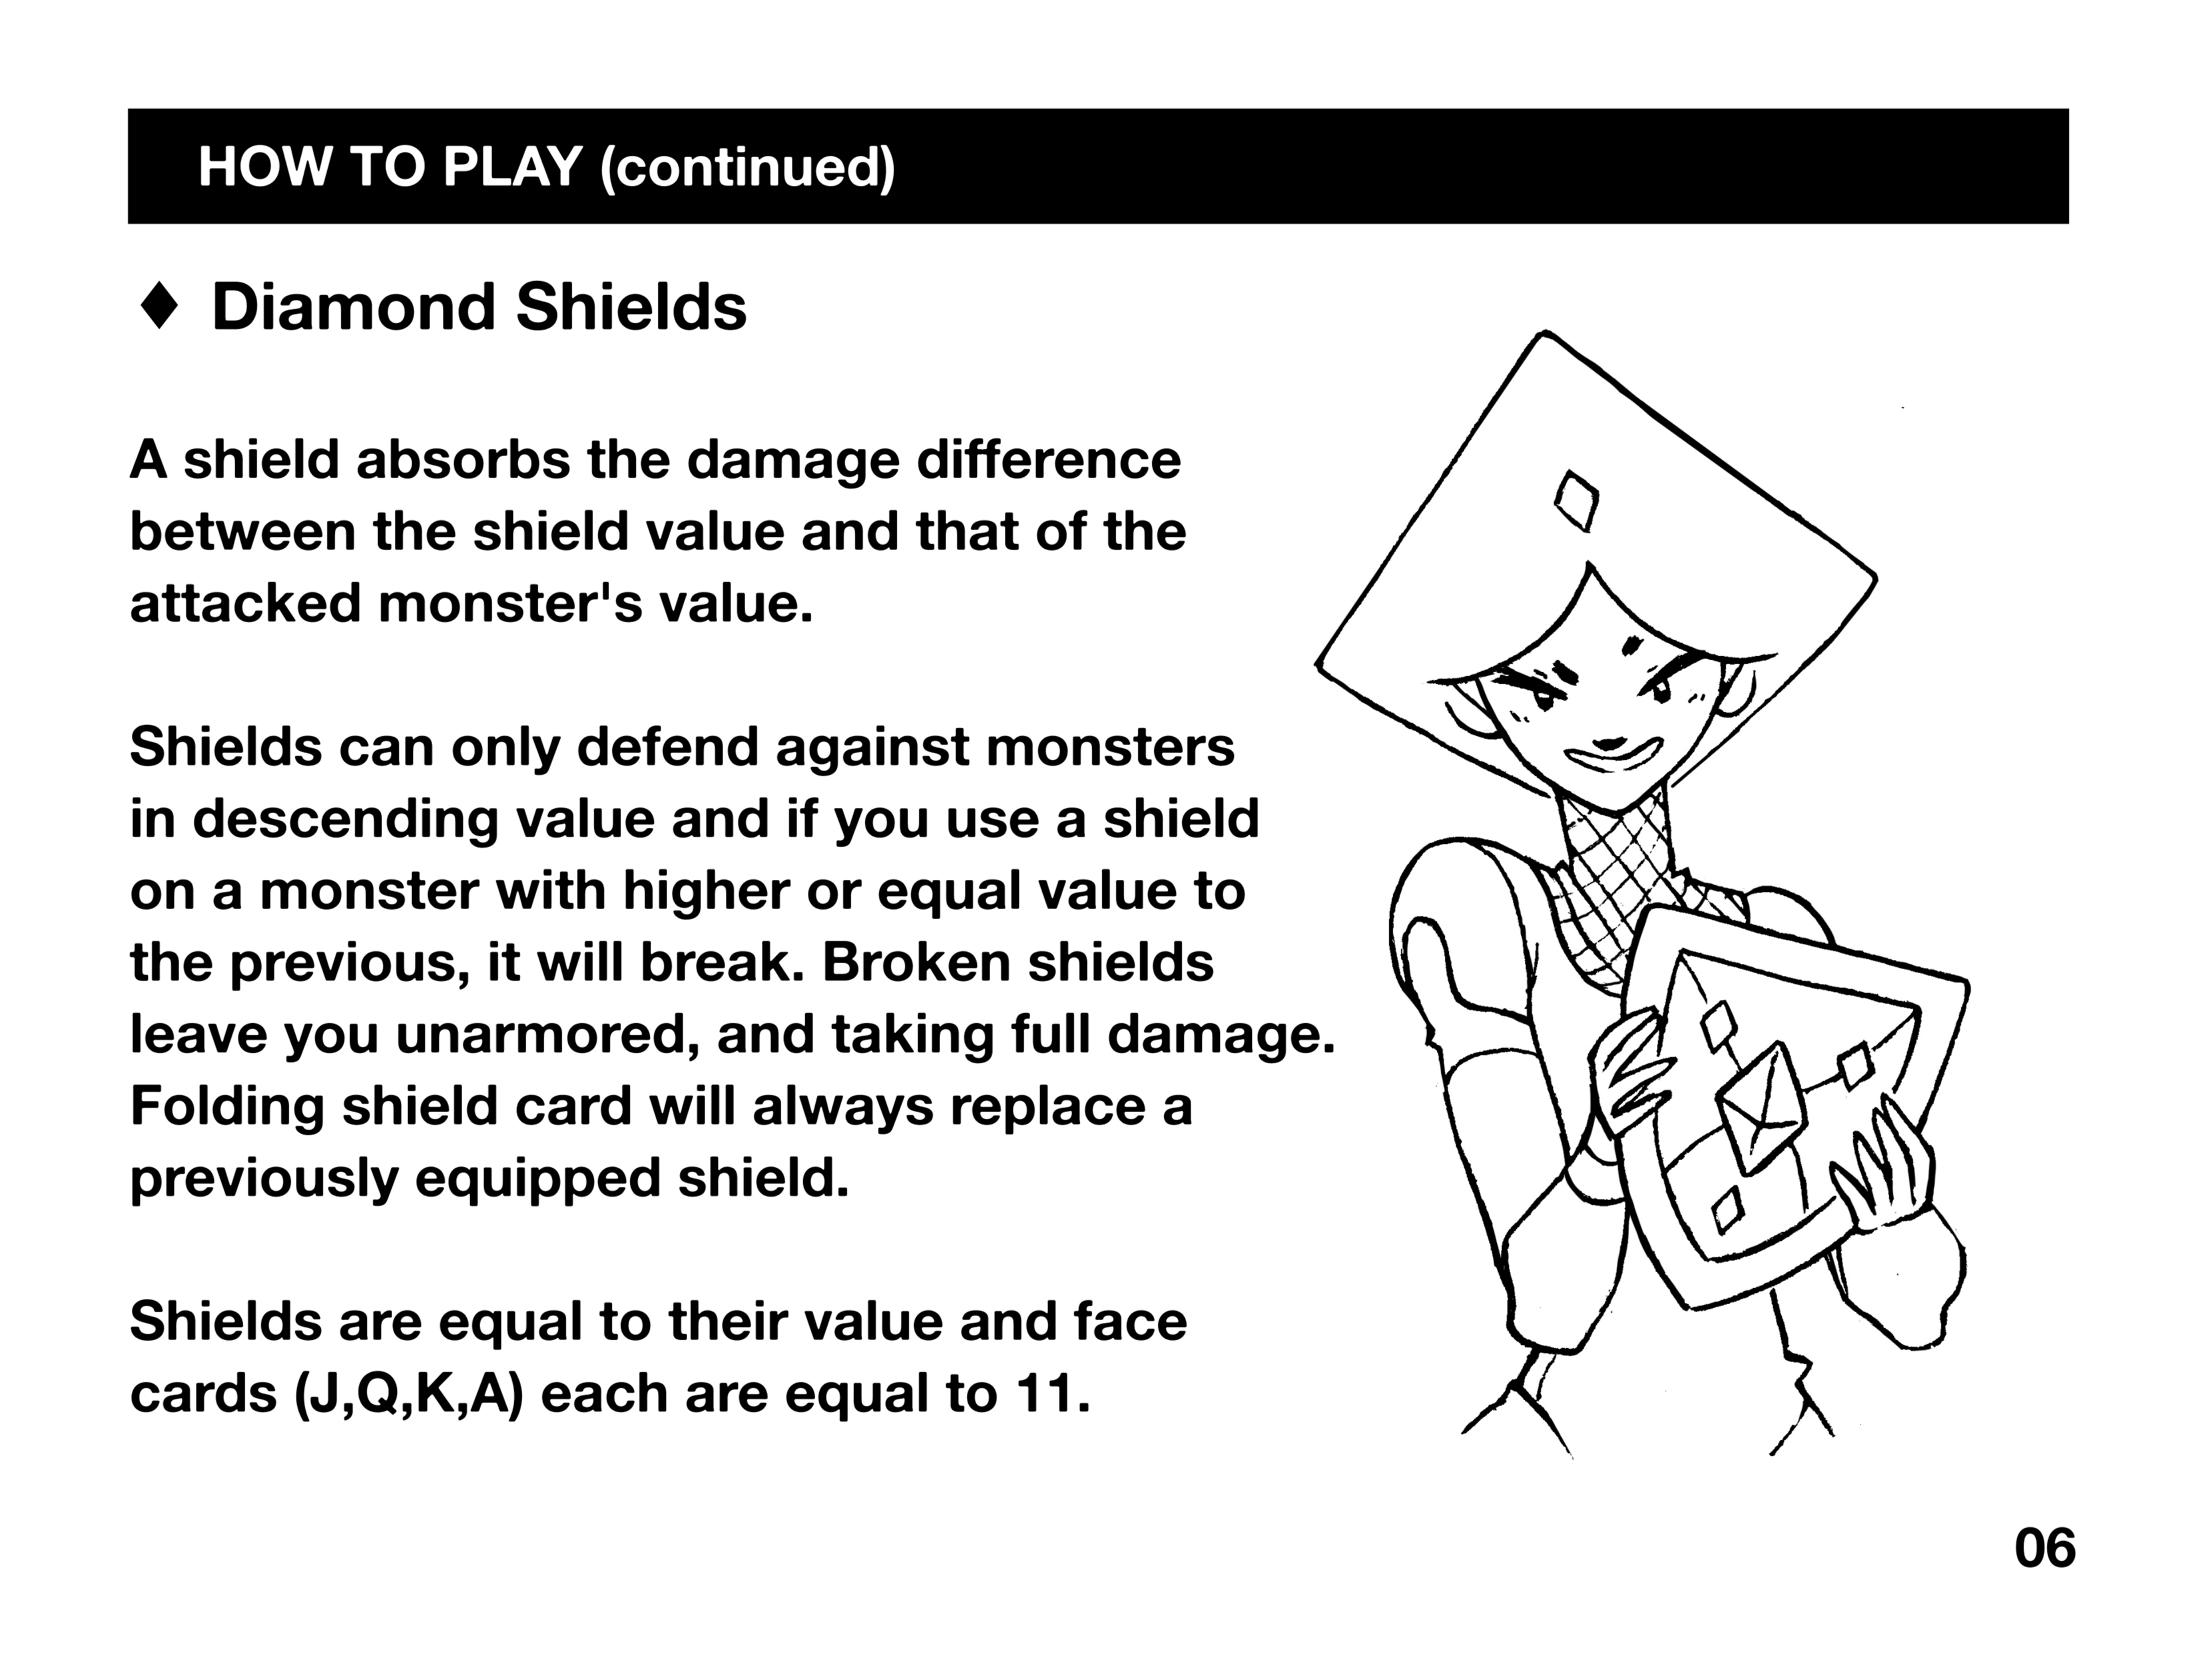 A preview image of the Donsol playing manual, explaining the use of Diamond Shields